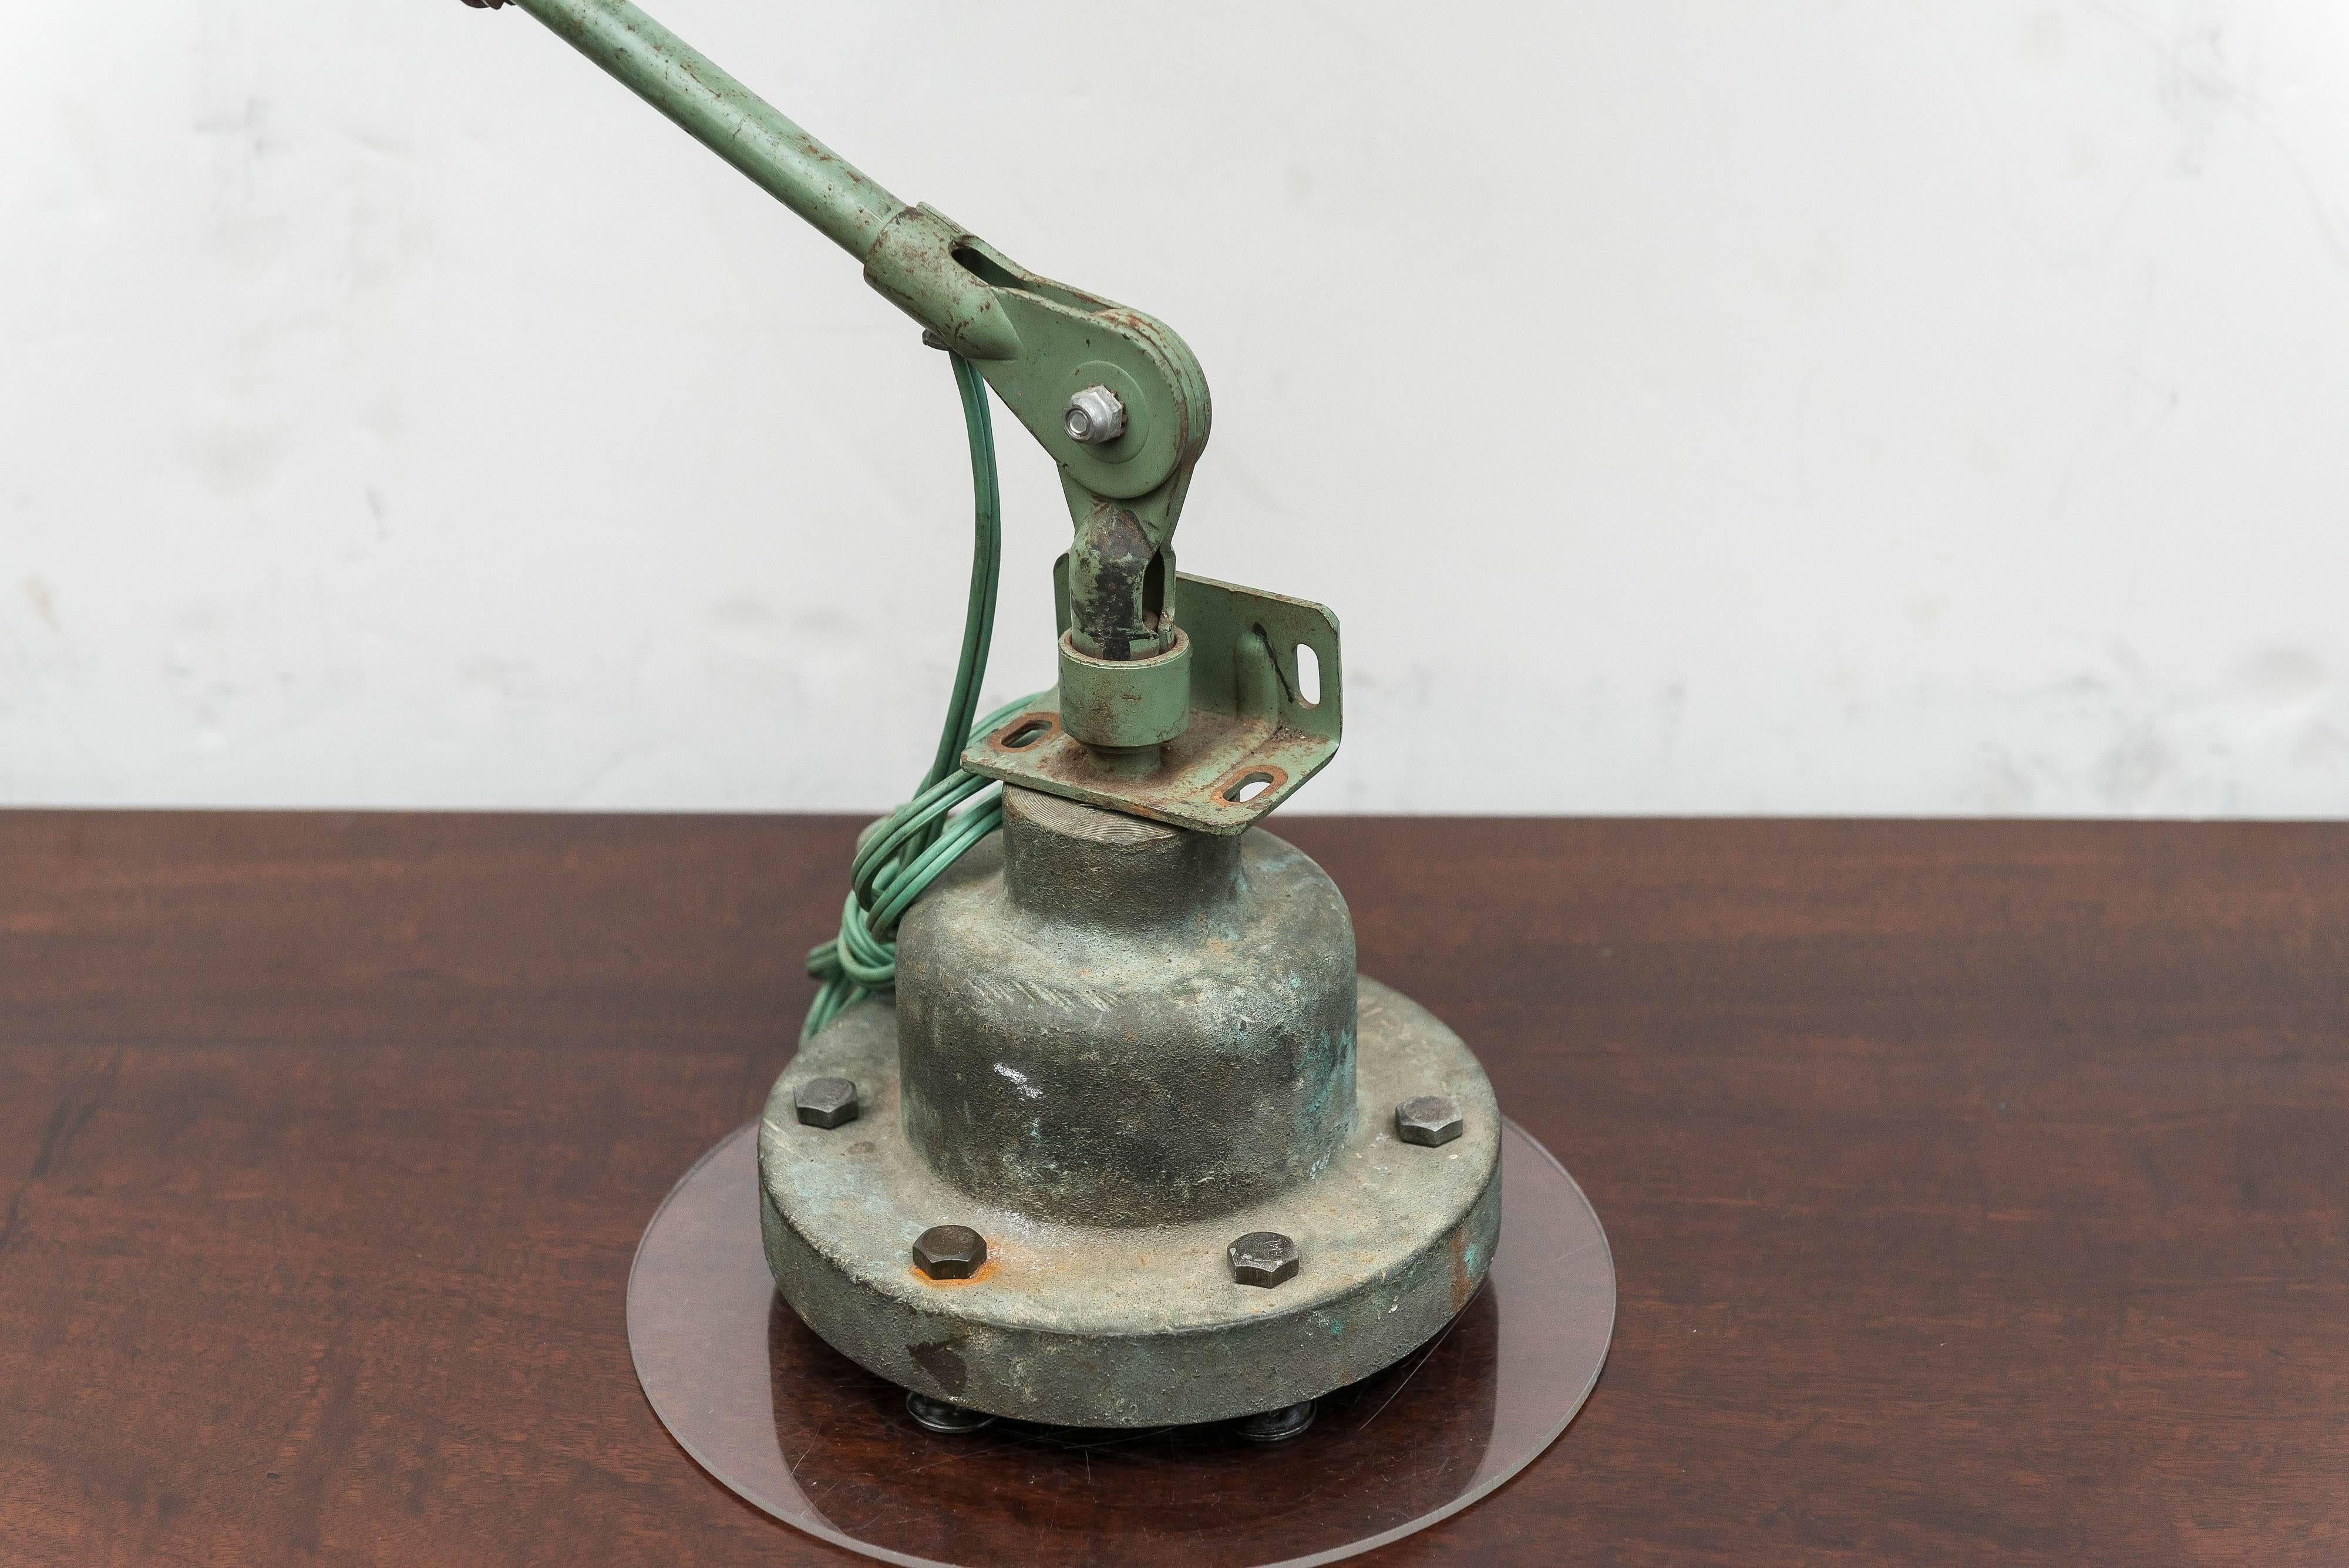 American Industrial lamp. Steel and old paint on a solid bronze base. Possible U S (no labels) government issue, circa 1940-1950.

The height and reach are adjustable. Well used surface is unrestored. Older wiring , socket and switch tested and